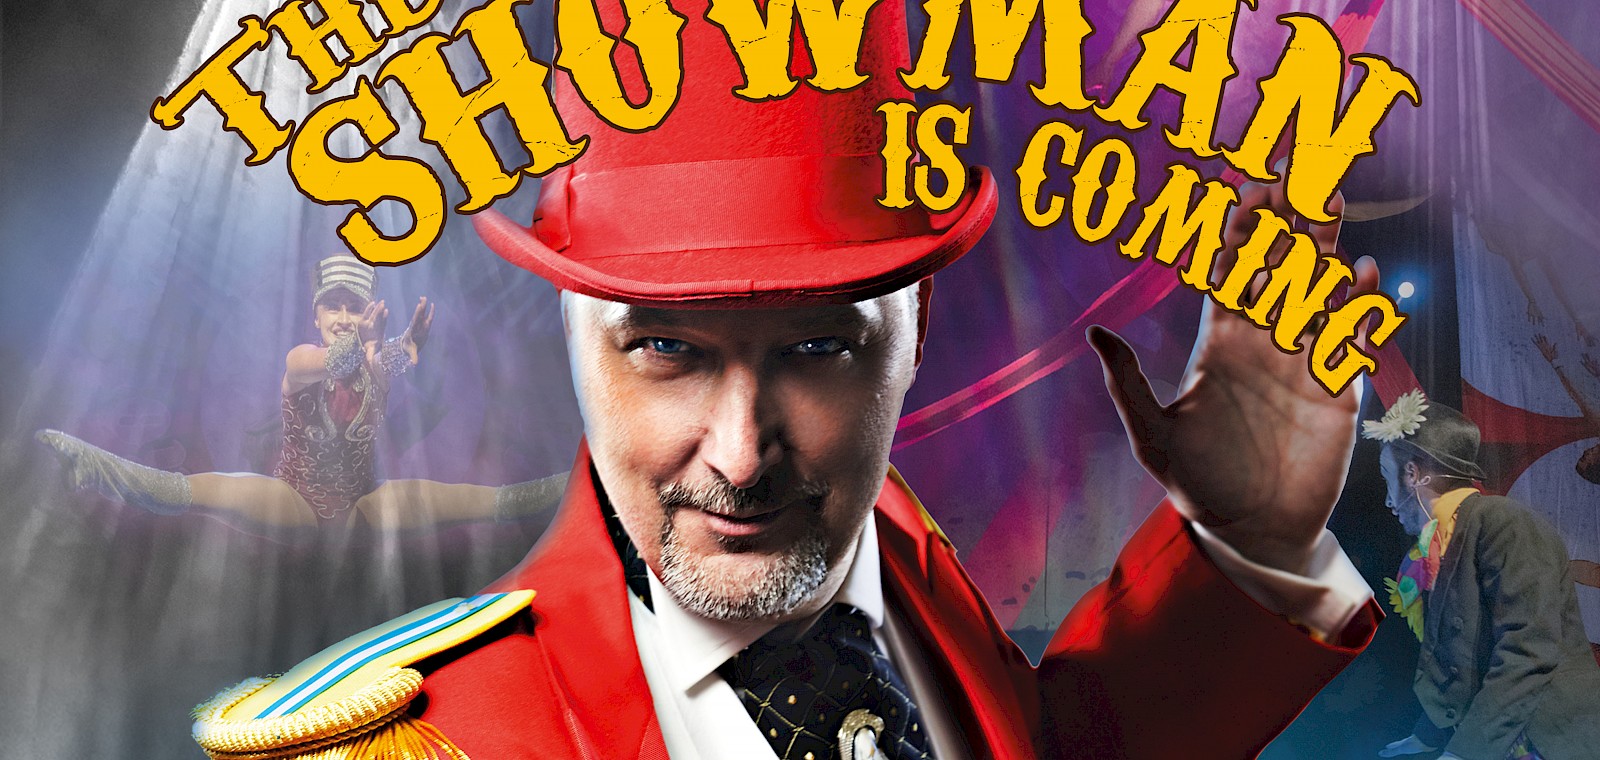 The Showman is coming